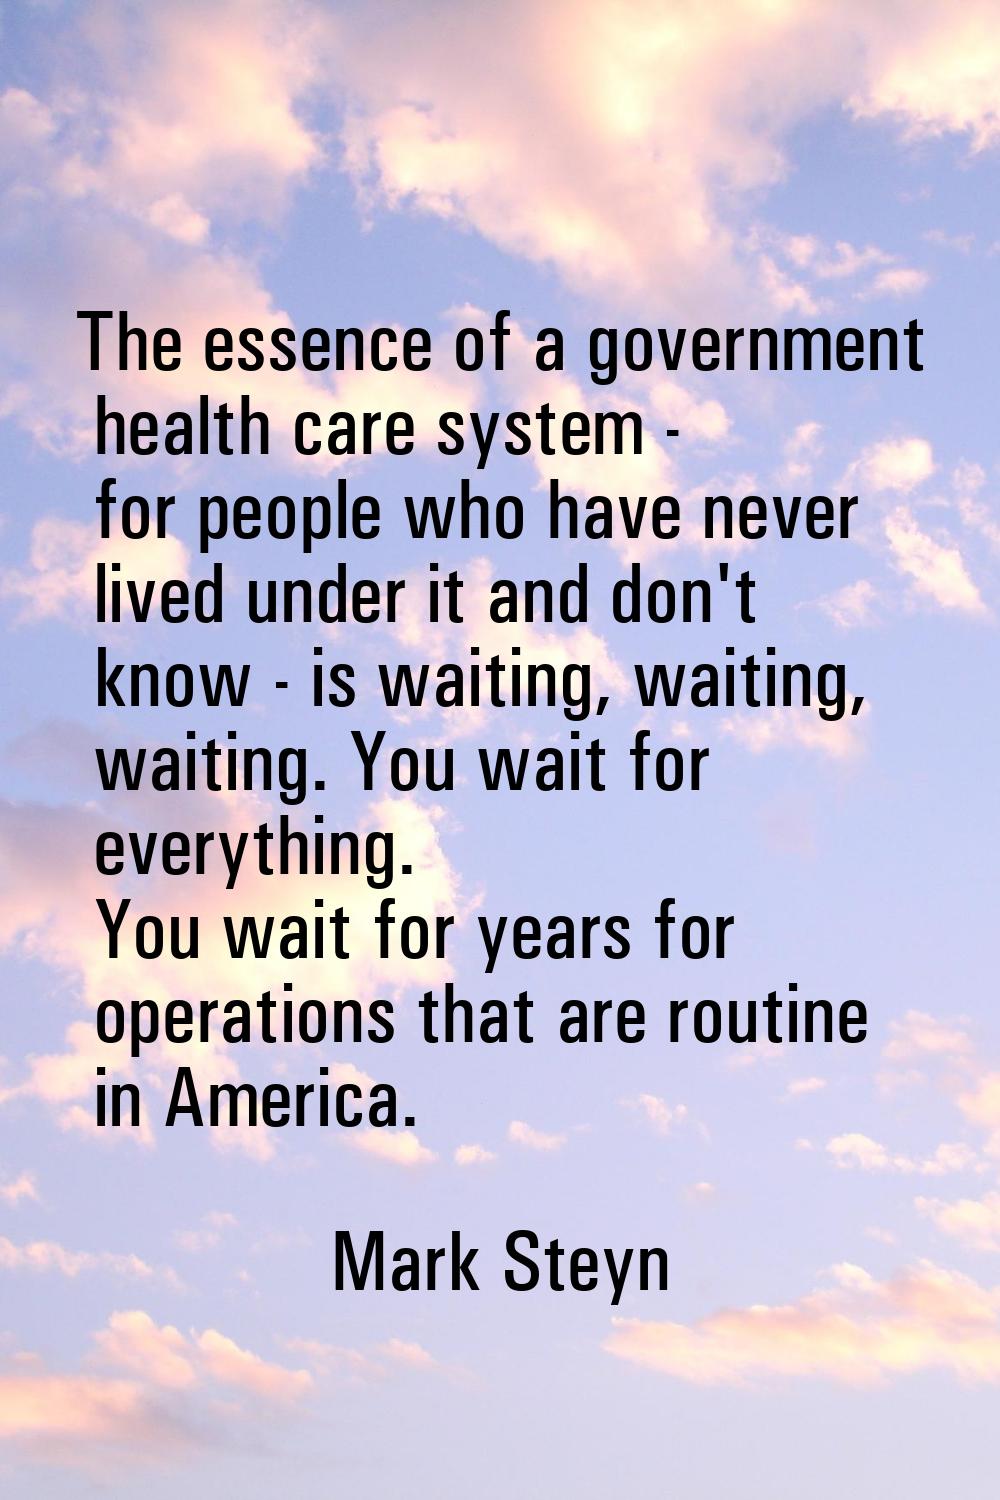 The essence of a government health care system - for people who have never lived under it and don't